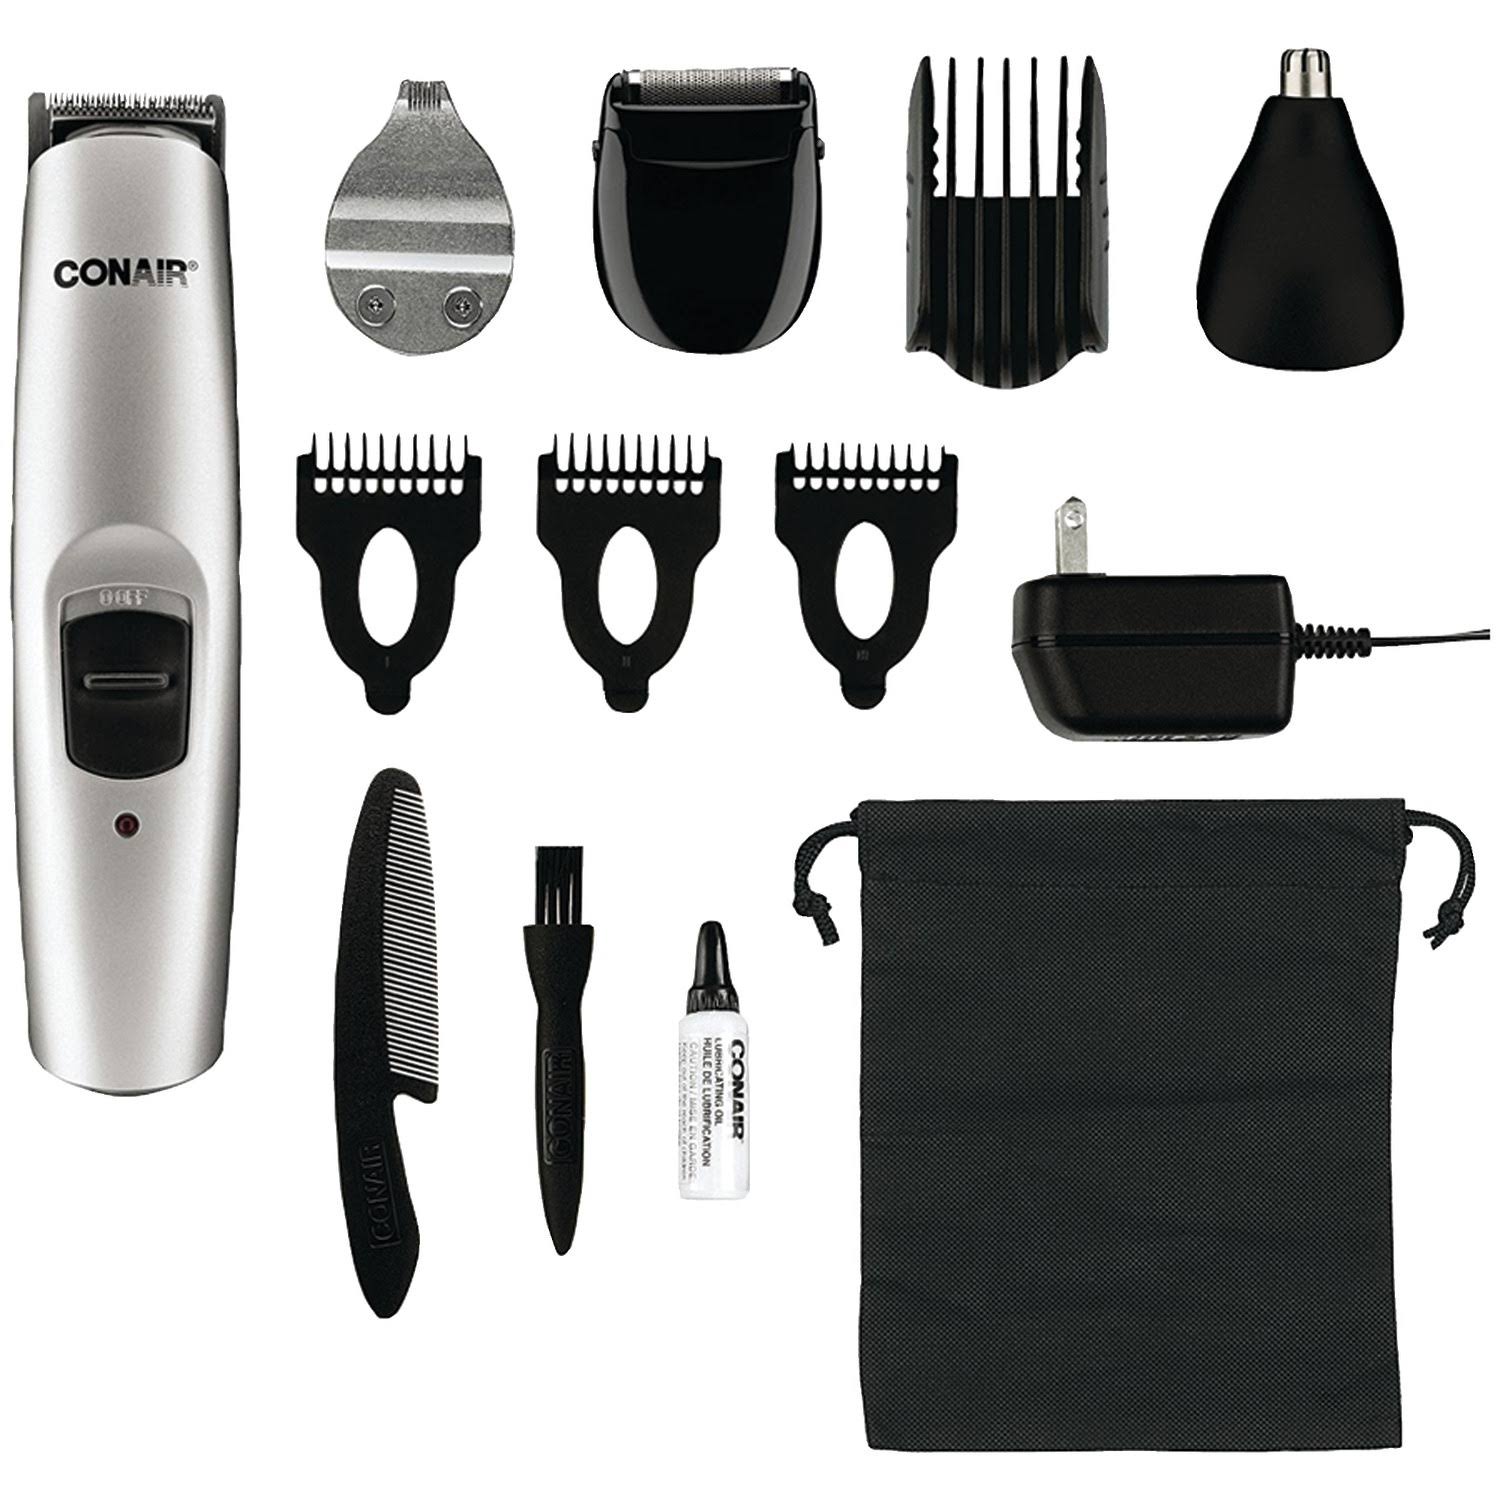 Conair for Men All in 1 Beard and Mustache Trimmer - Rechargeable